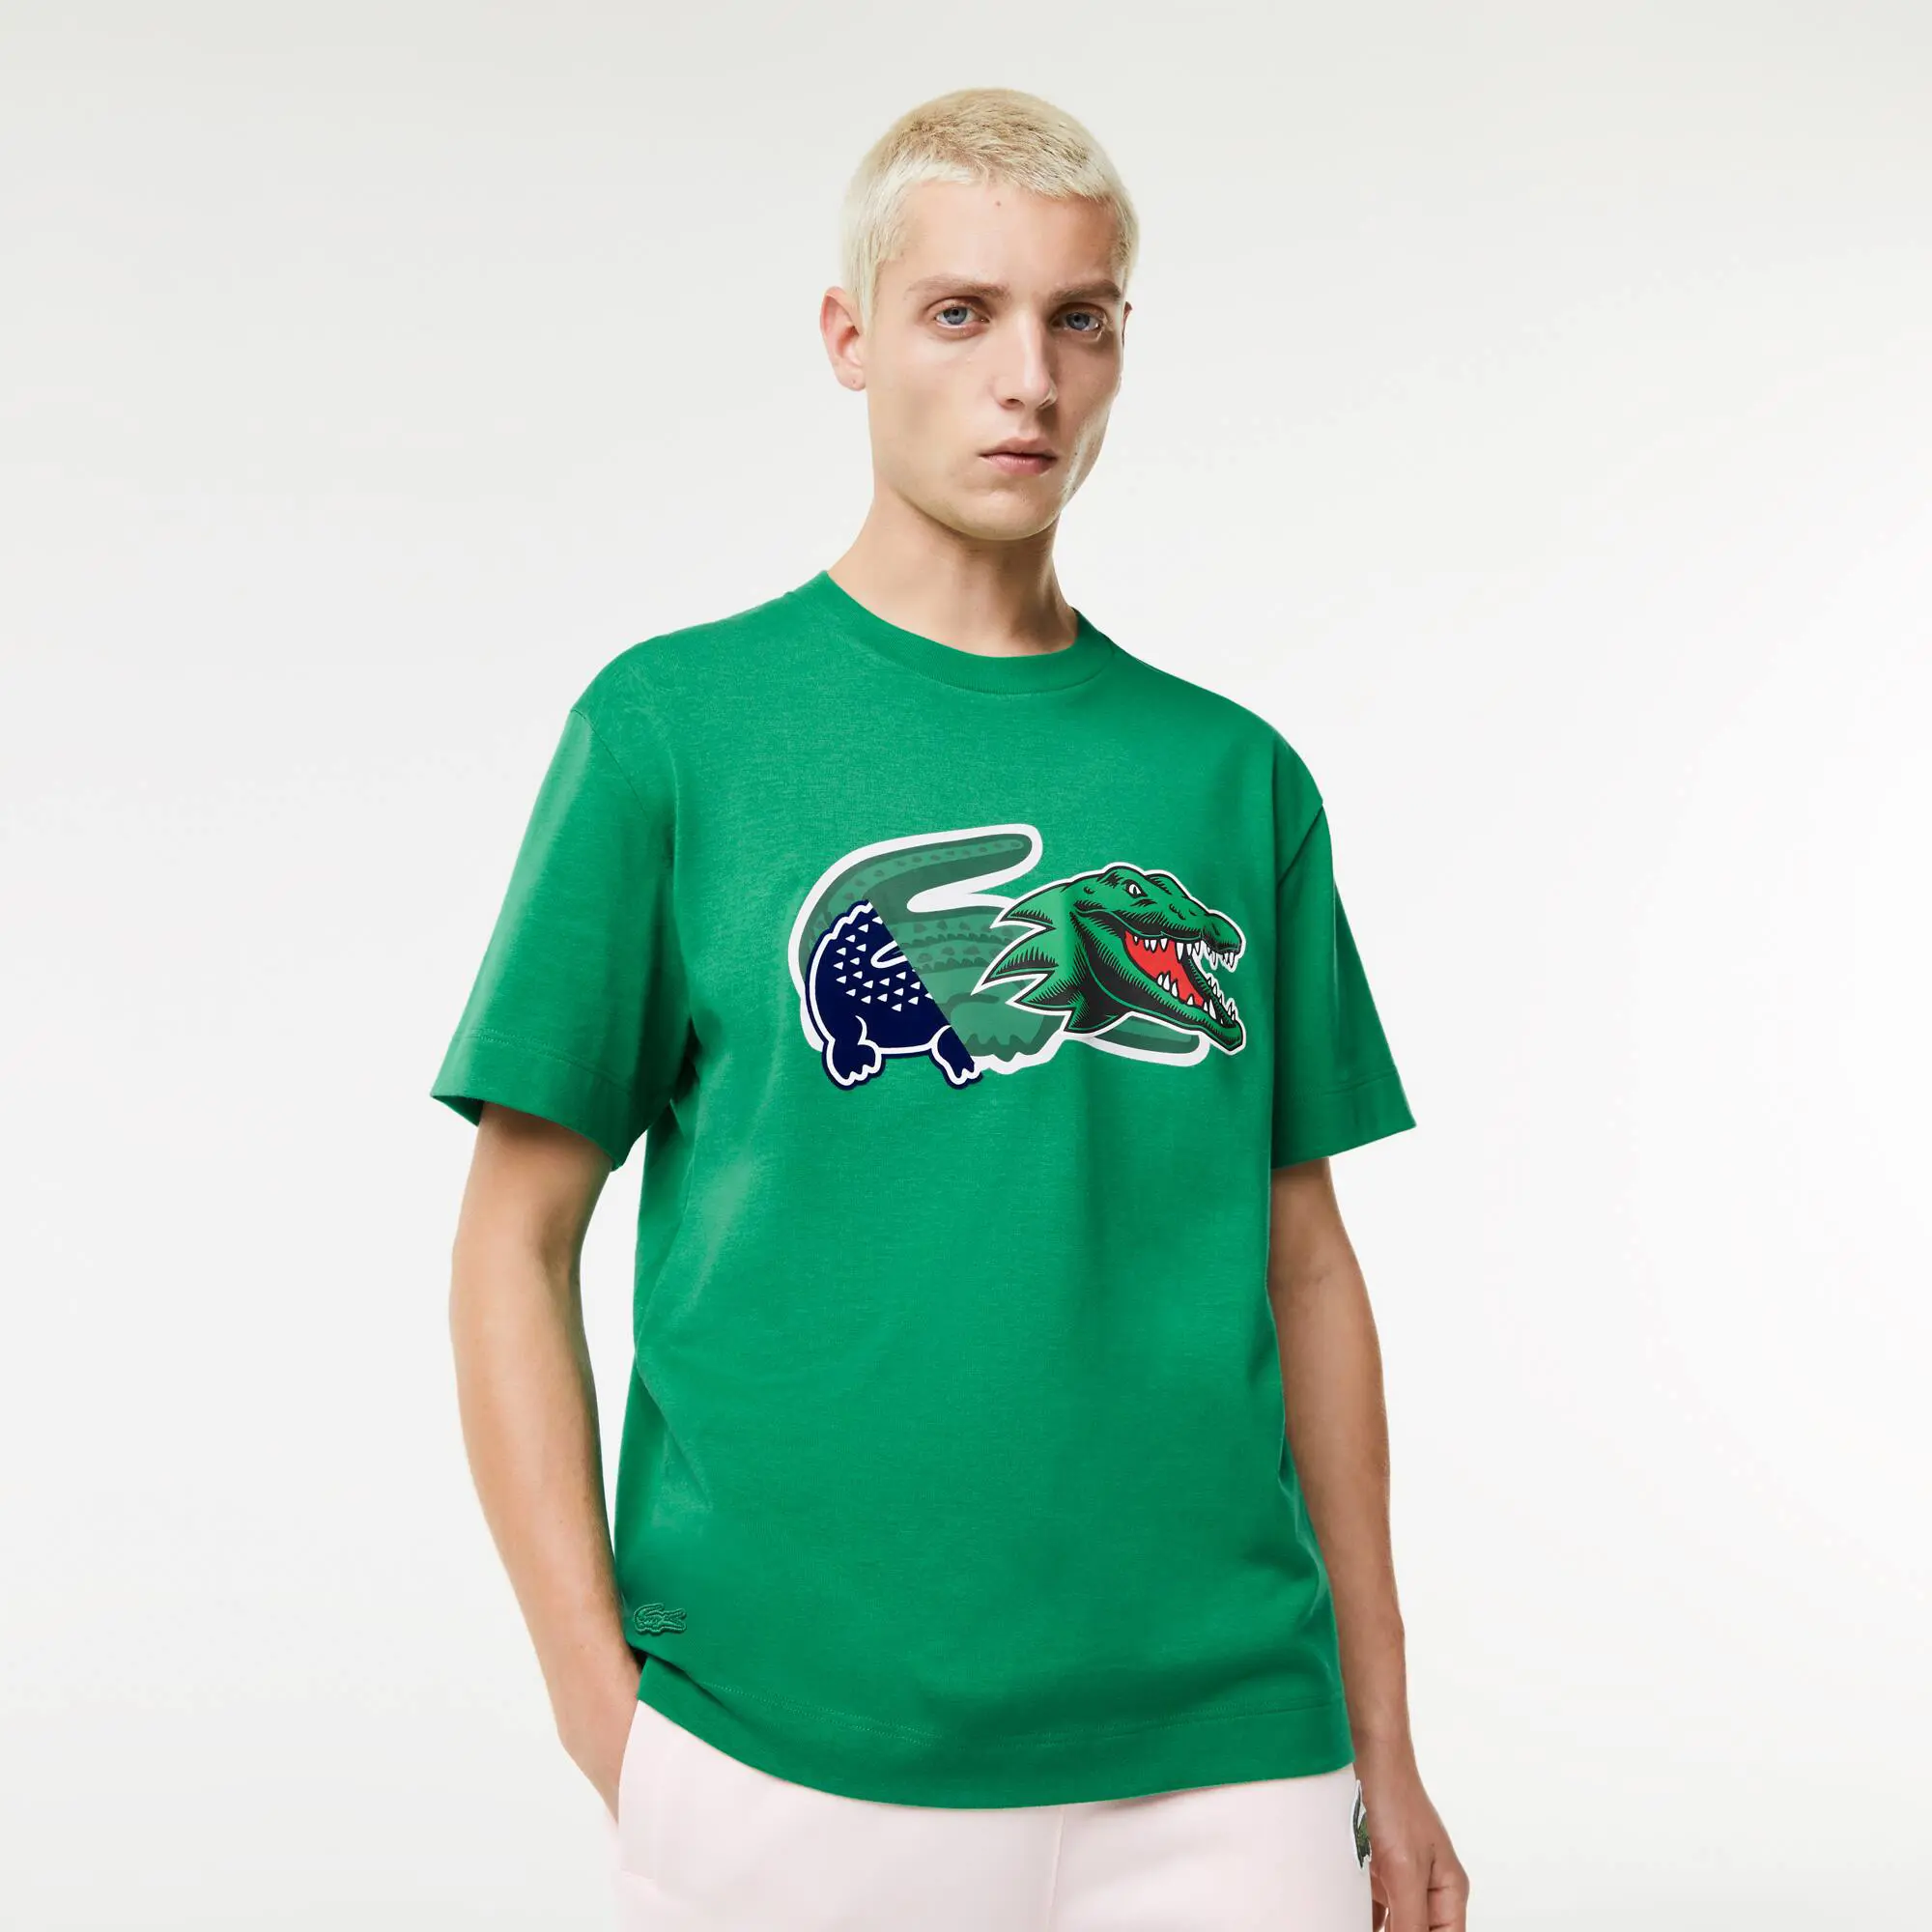 Lacoste T-shirt relaxed fit com crocodilo oversize Holiday para homem. 1